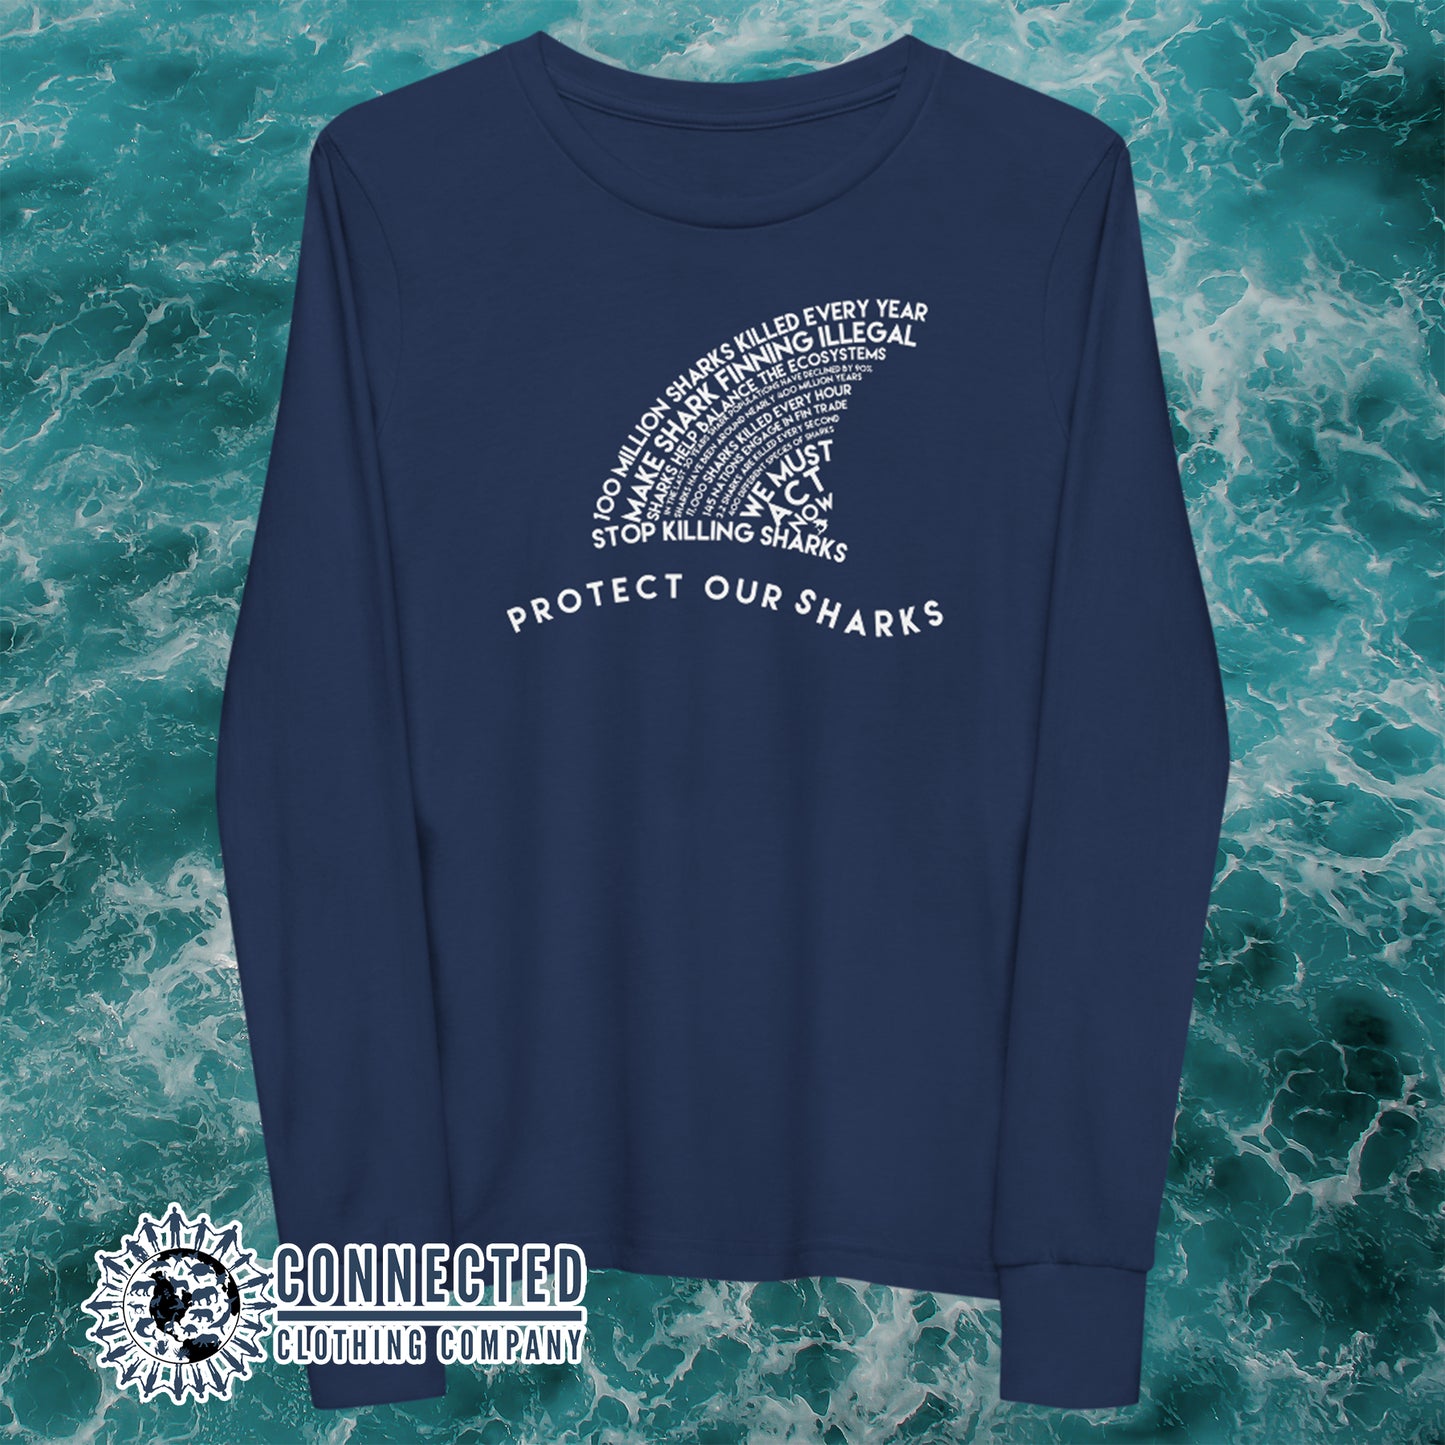 Navy Blue Protect Our Sharks Youth Long-Sleeve Tee - sweetsherriloudesigns - Ethically and Sustainably Made - 10% donated to Oceana shark conservation